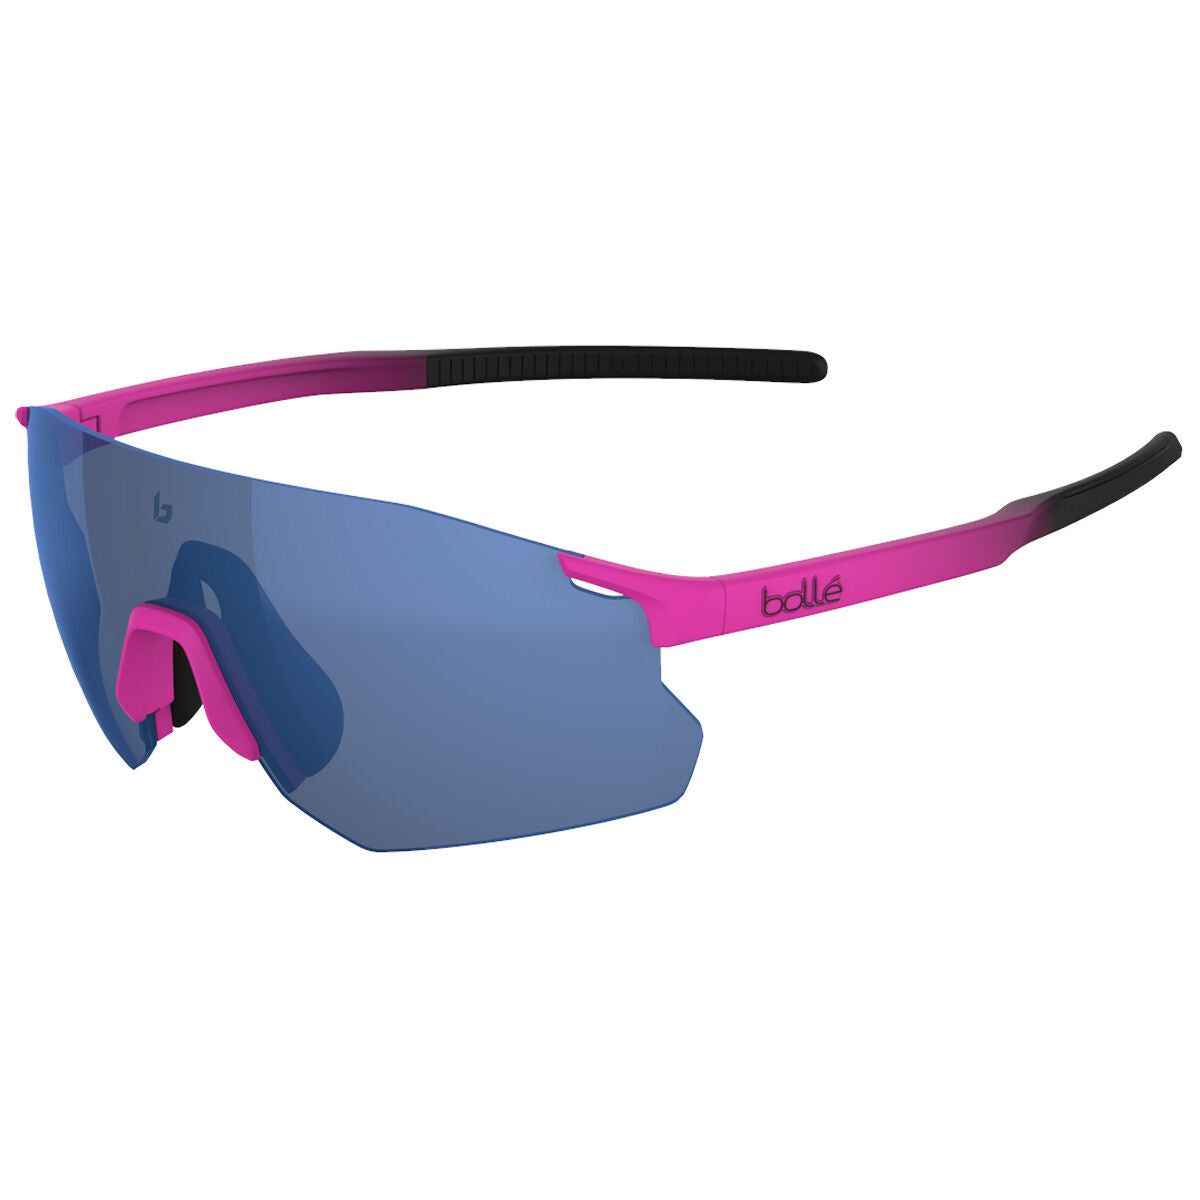 Bolle Icarus Sunglasses  Pink Black Matte One Size